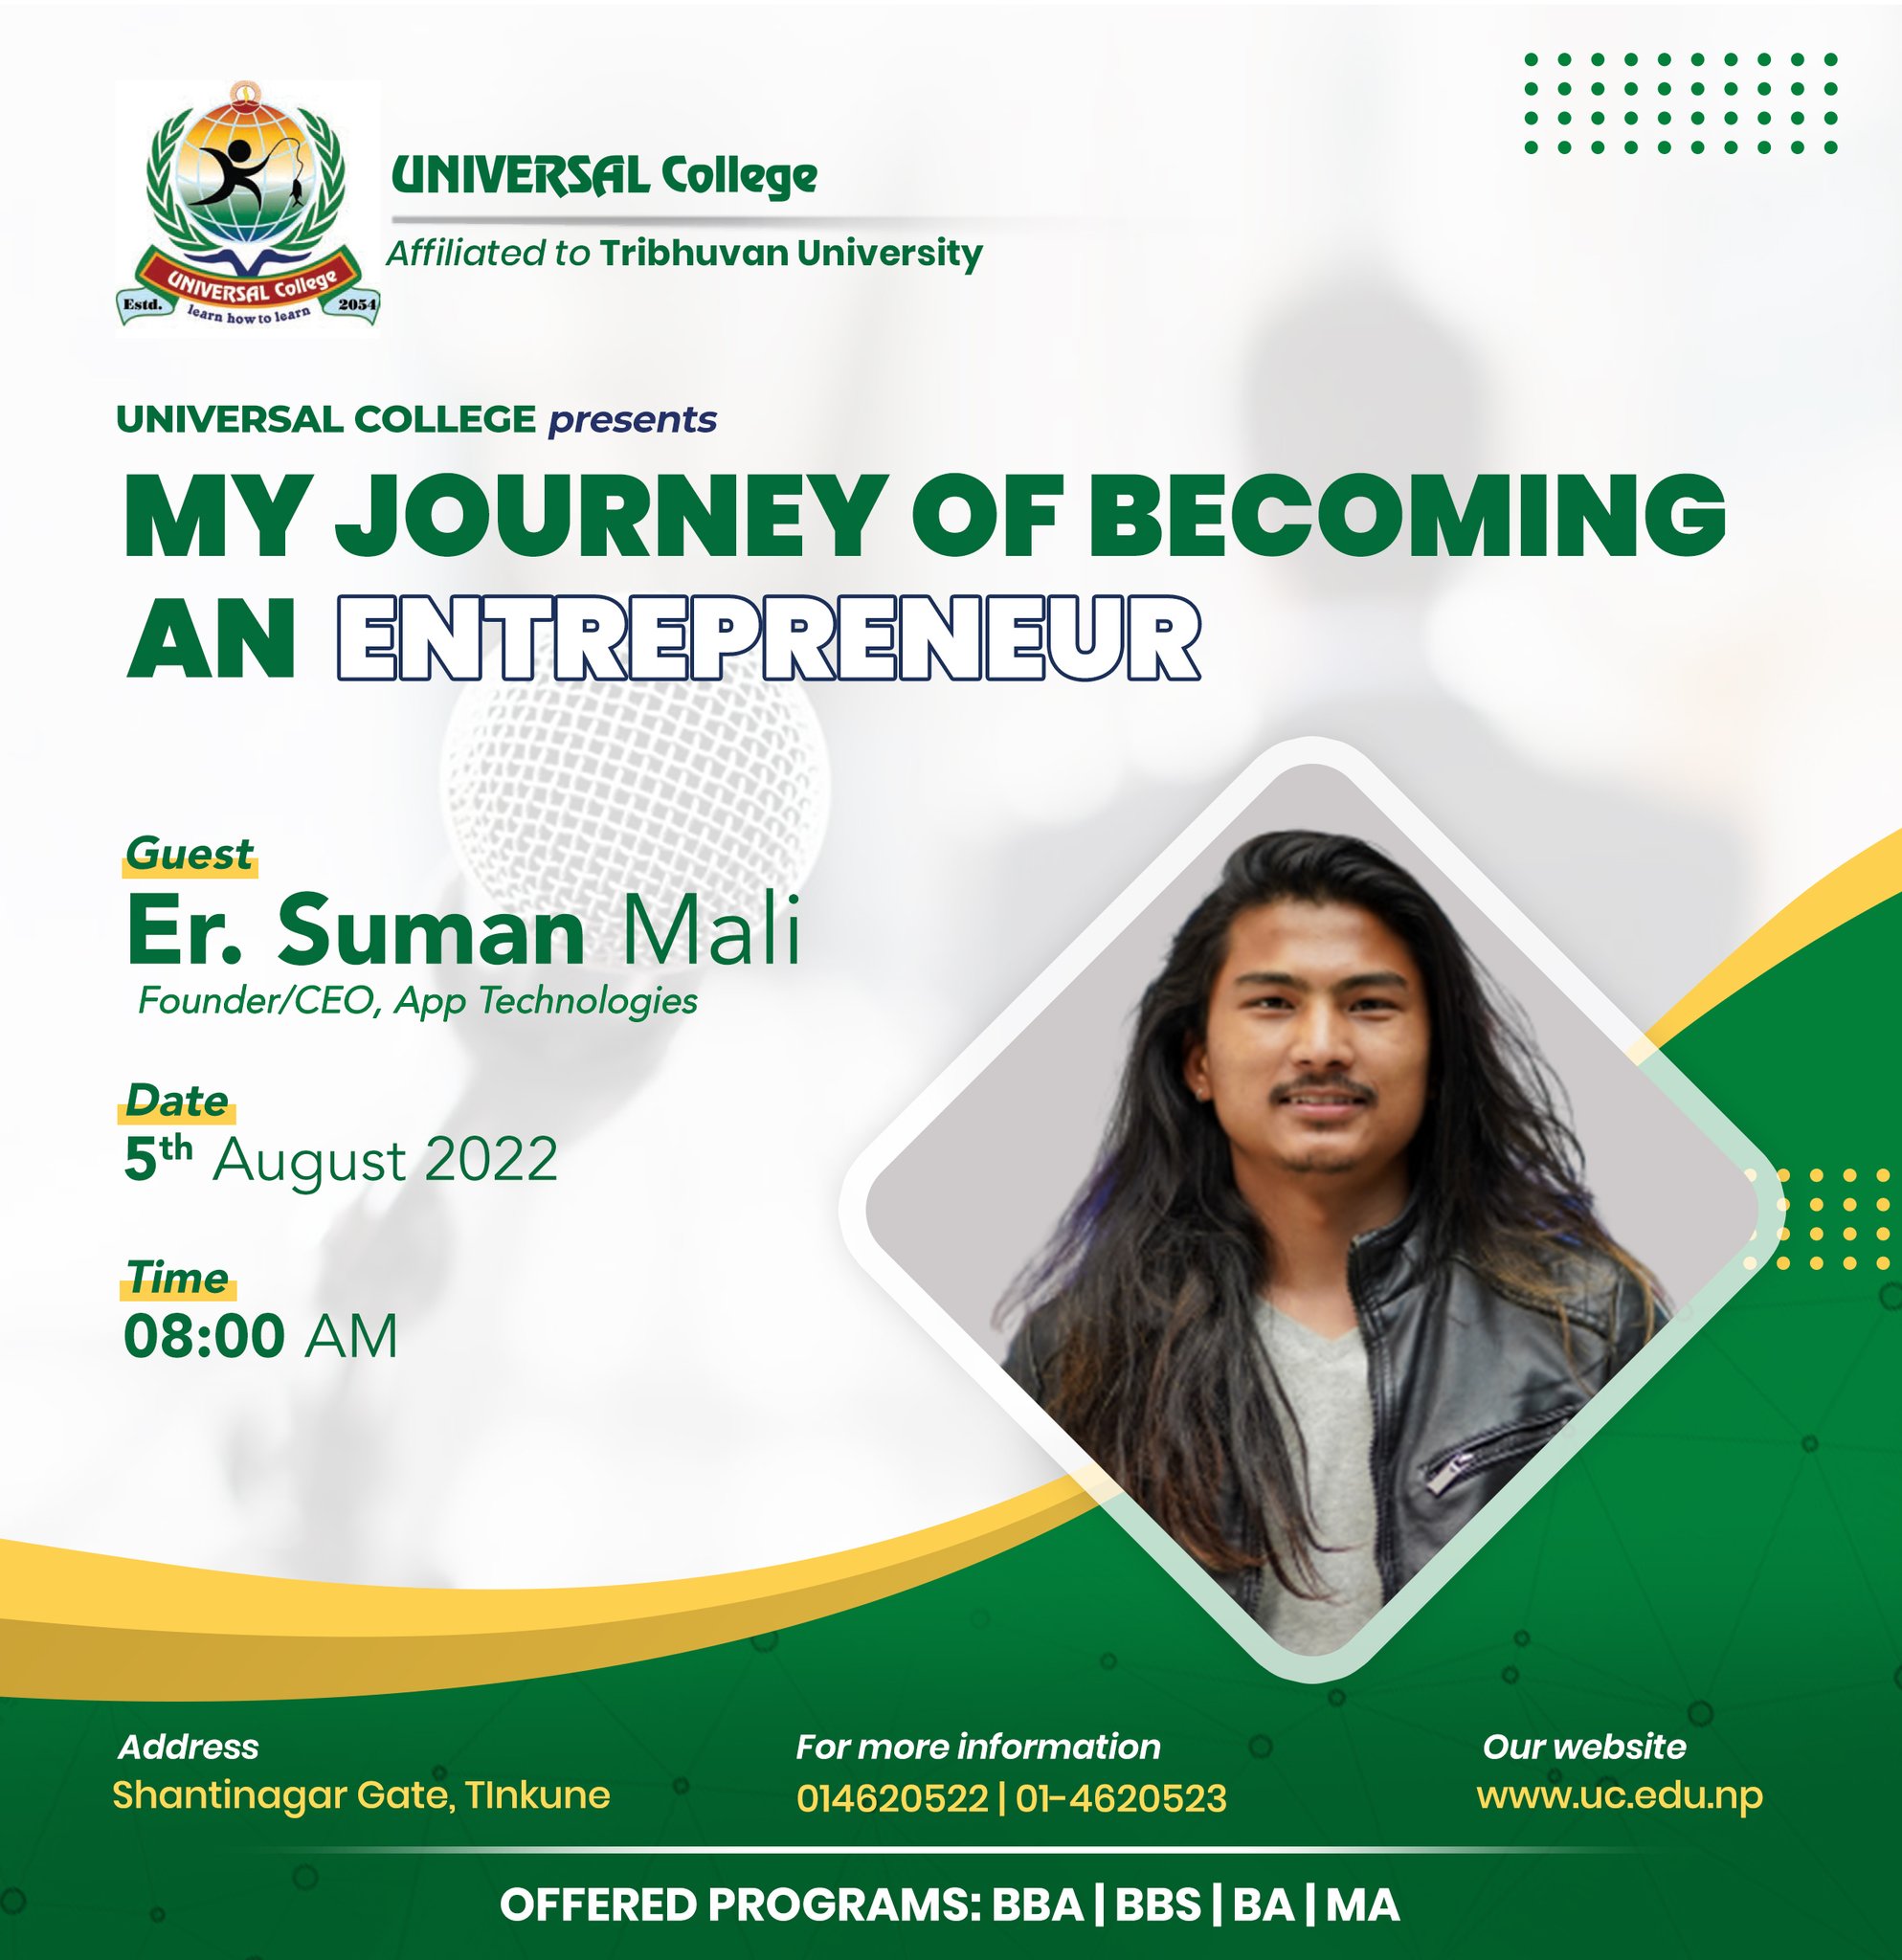 My Journey of Becoming an Entrepreneur